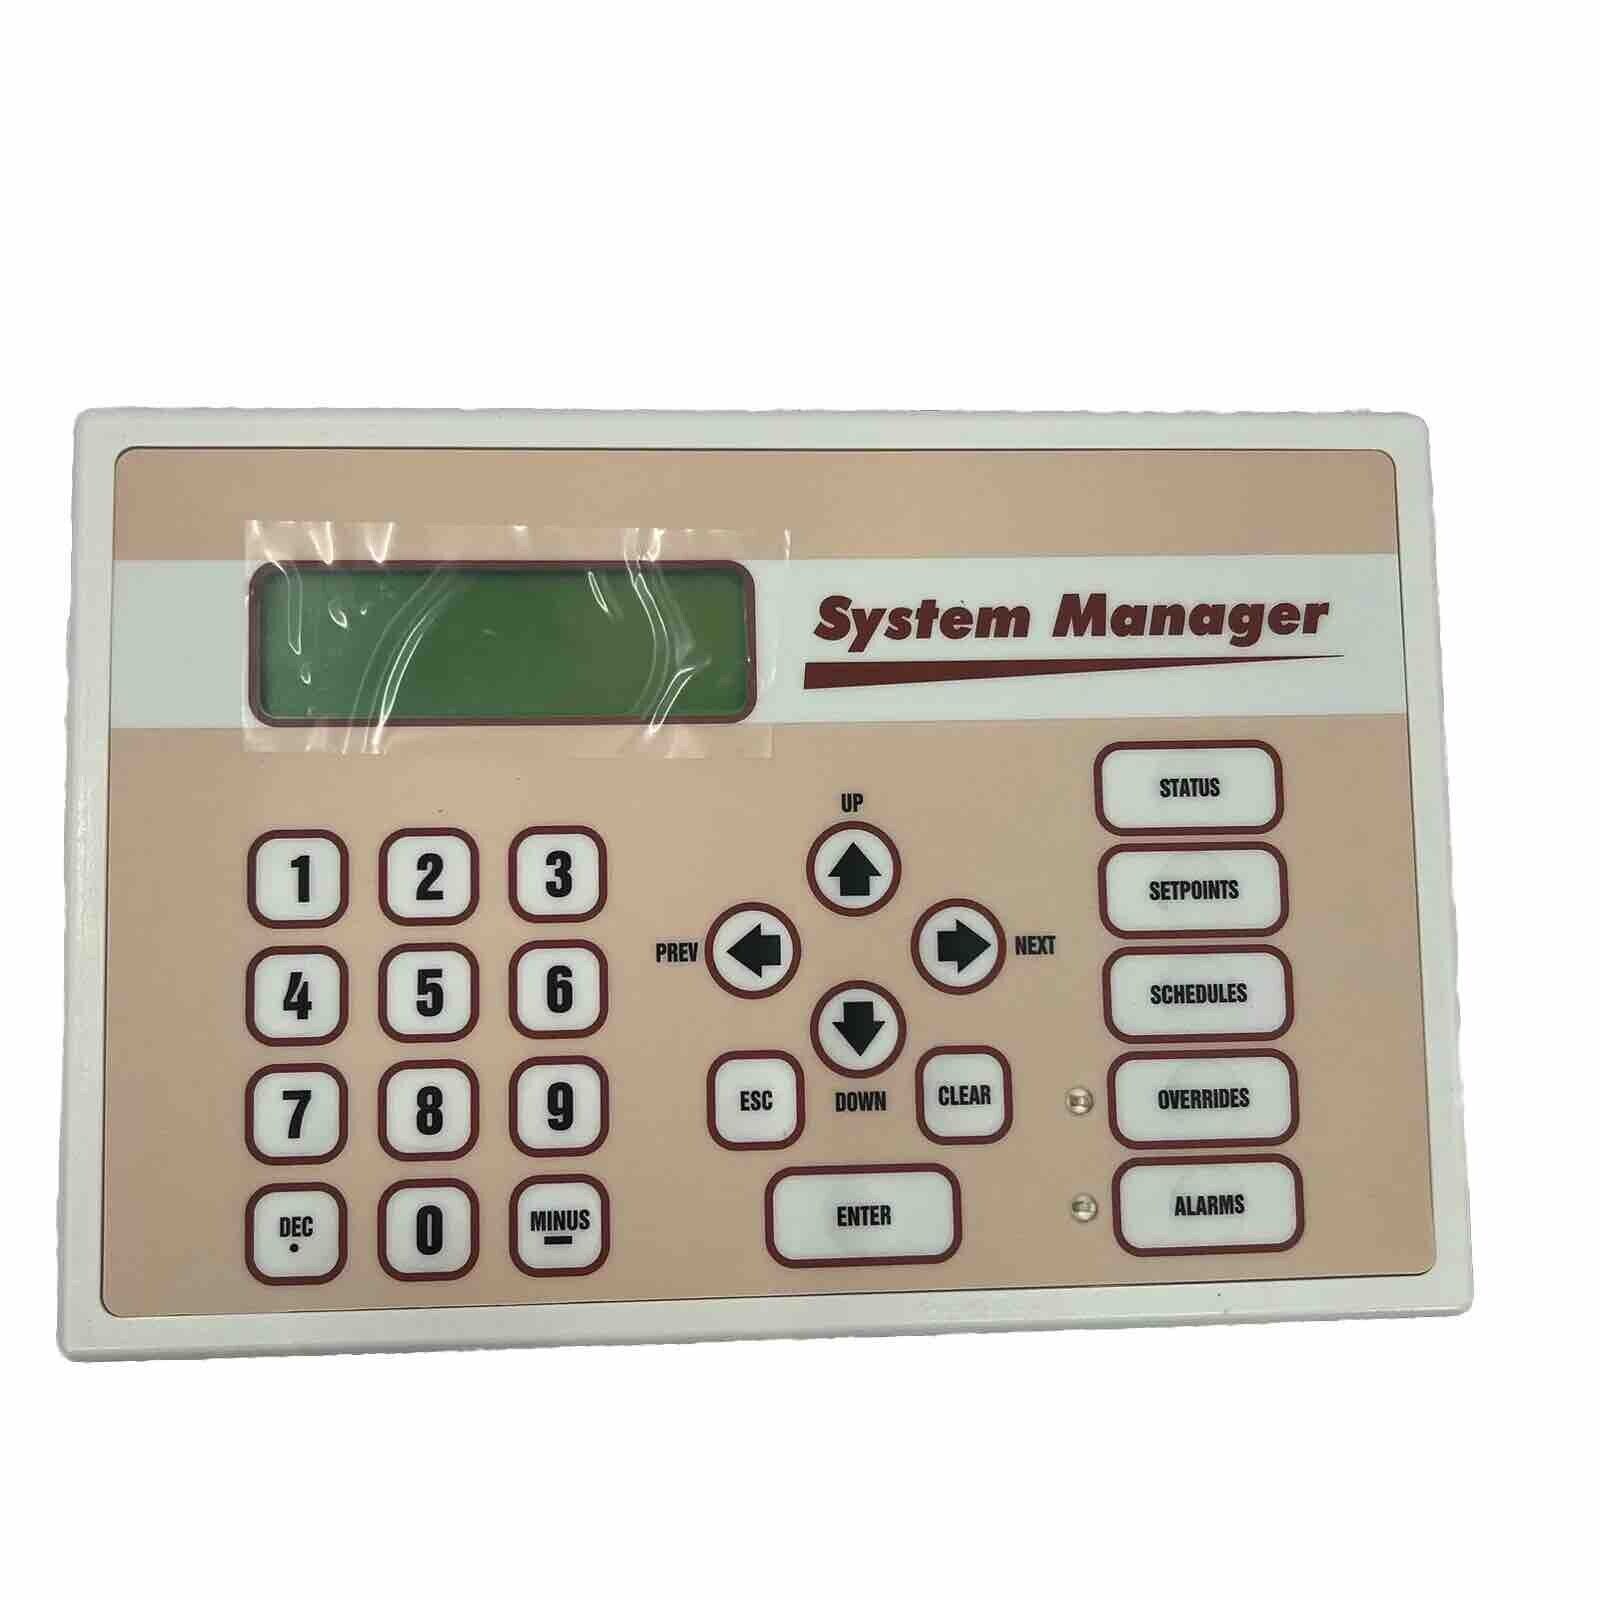 Aaon Wattmaster Modular System Manager V36570 OE392-12-A-033293